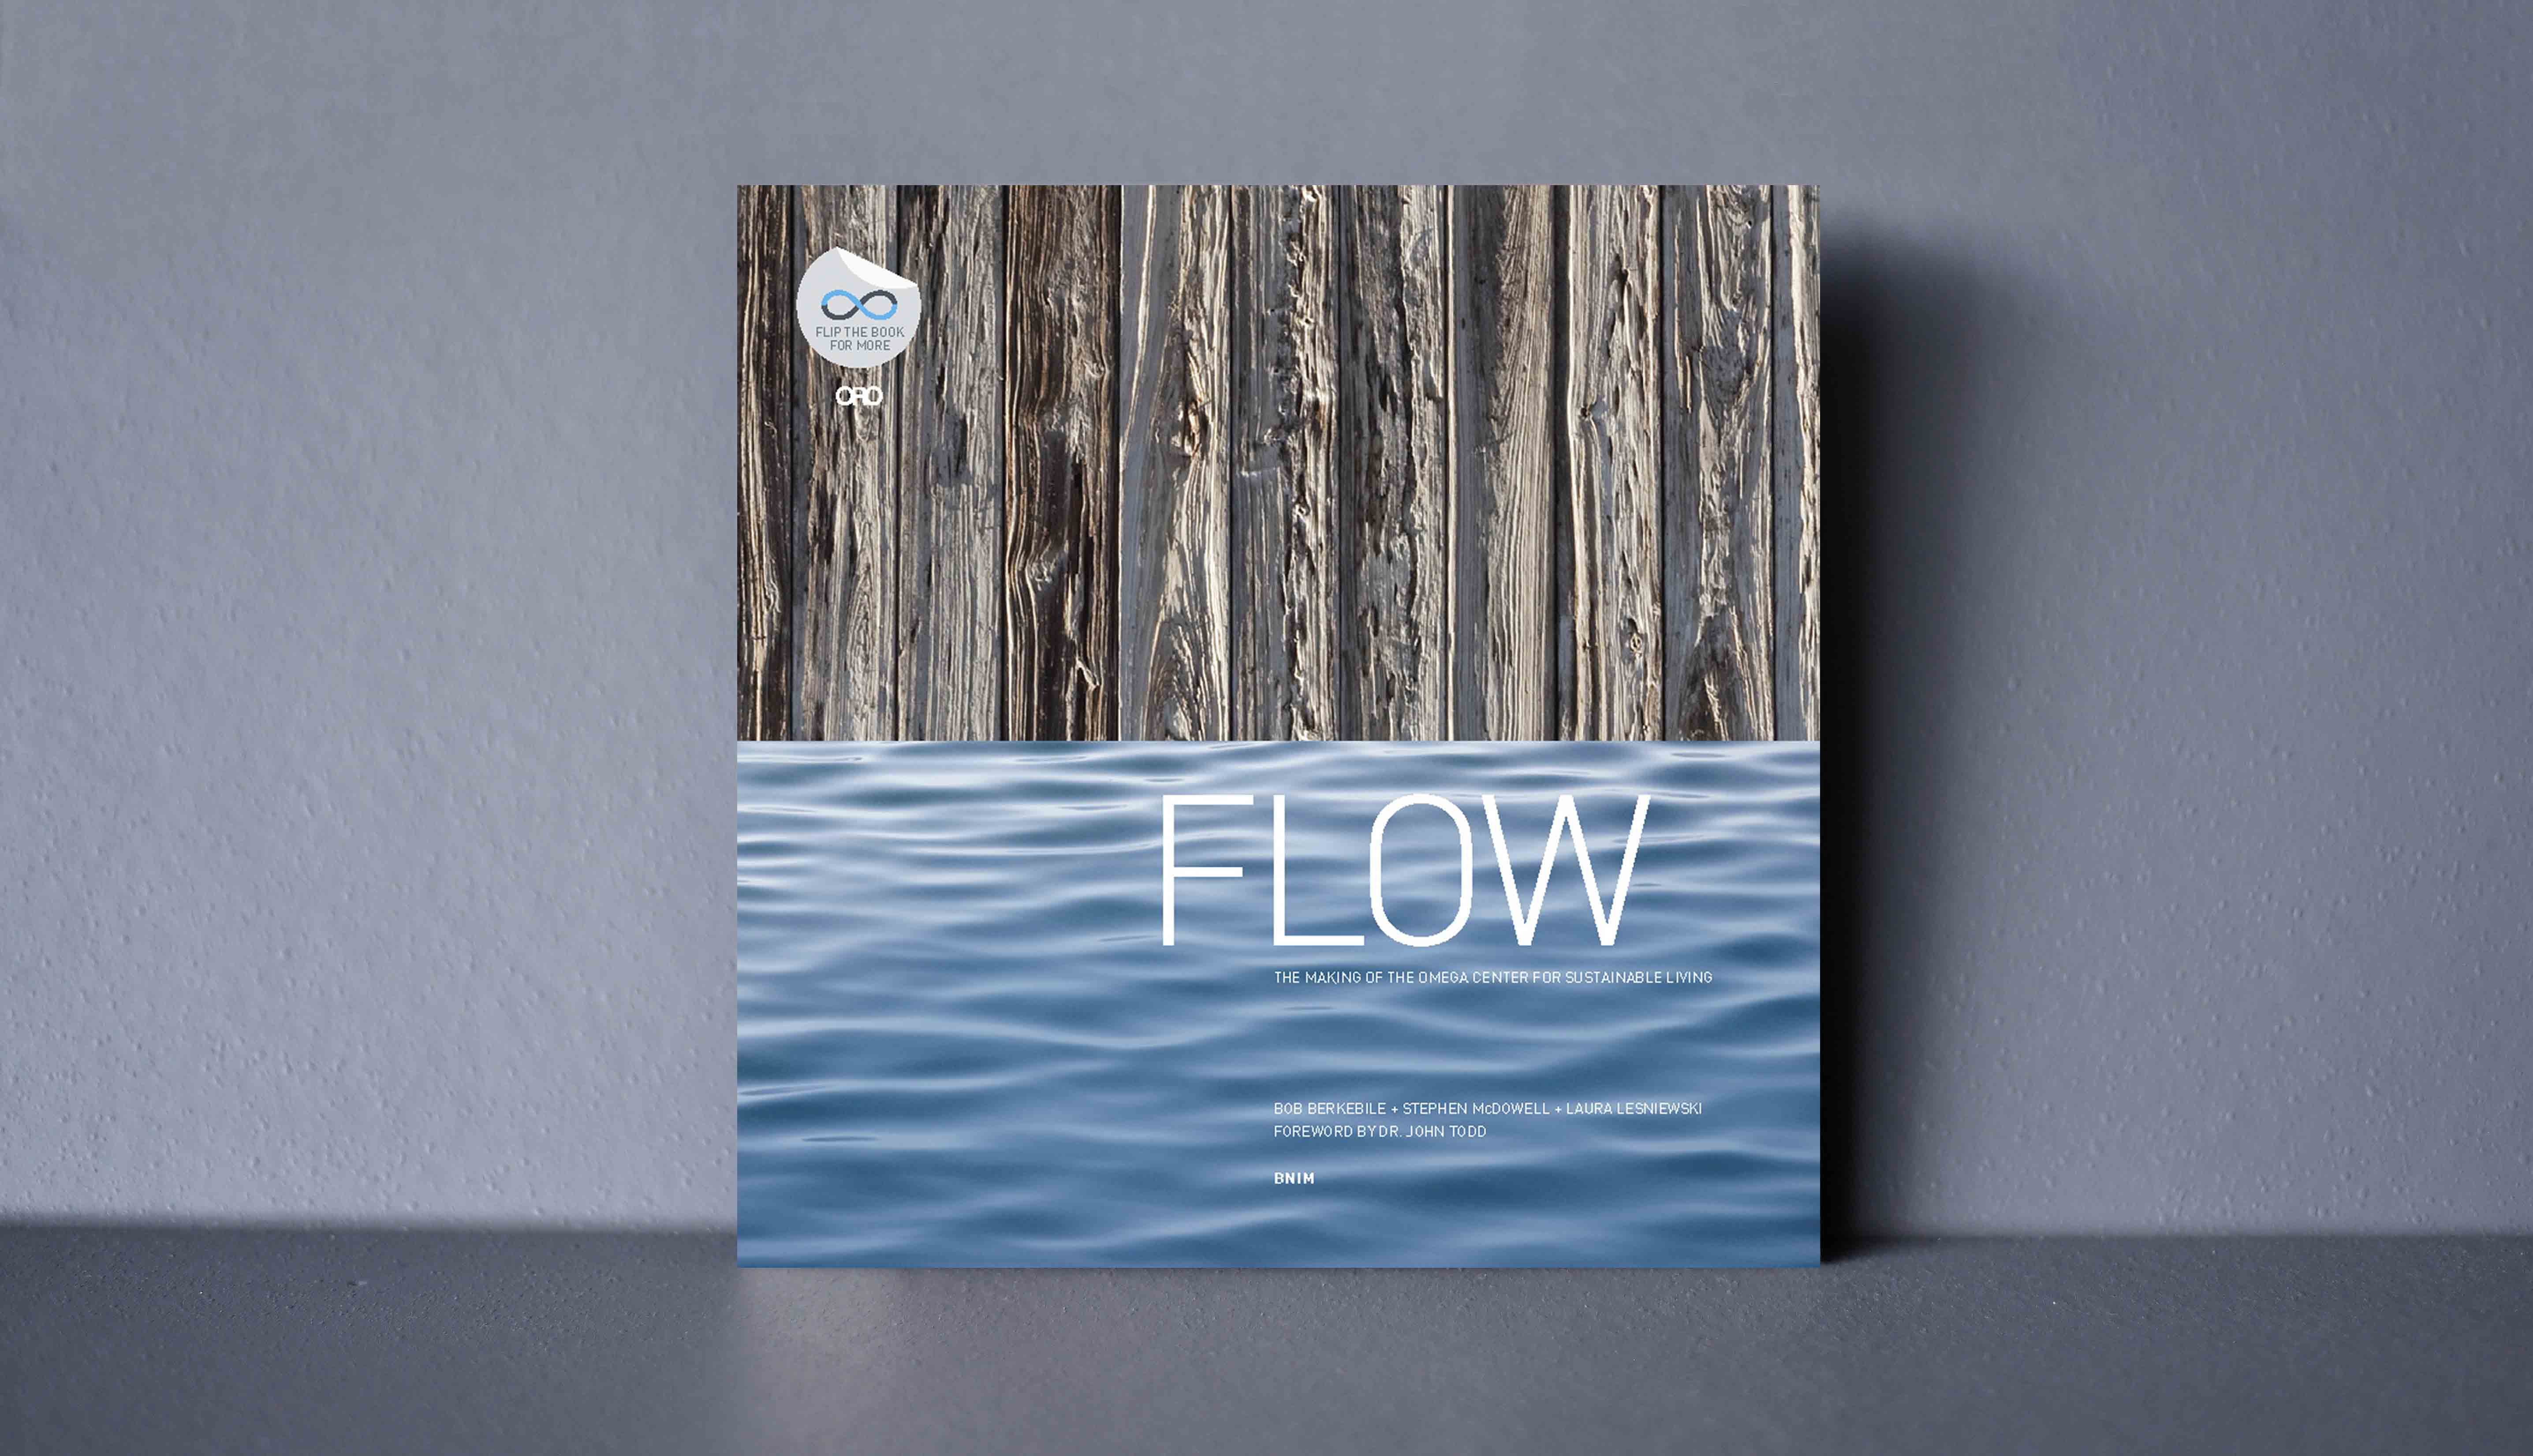 FLOW - The Making of the Omega Center for Sustainable Living